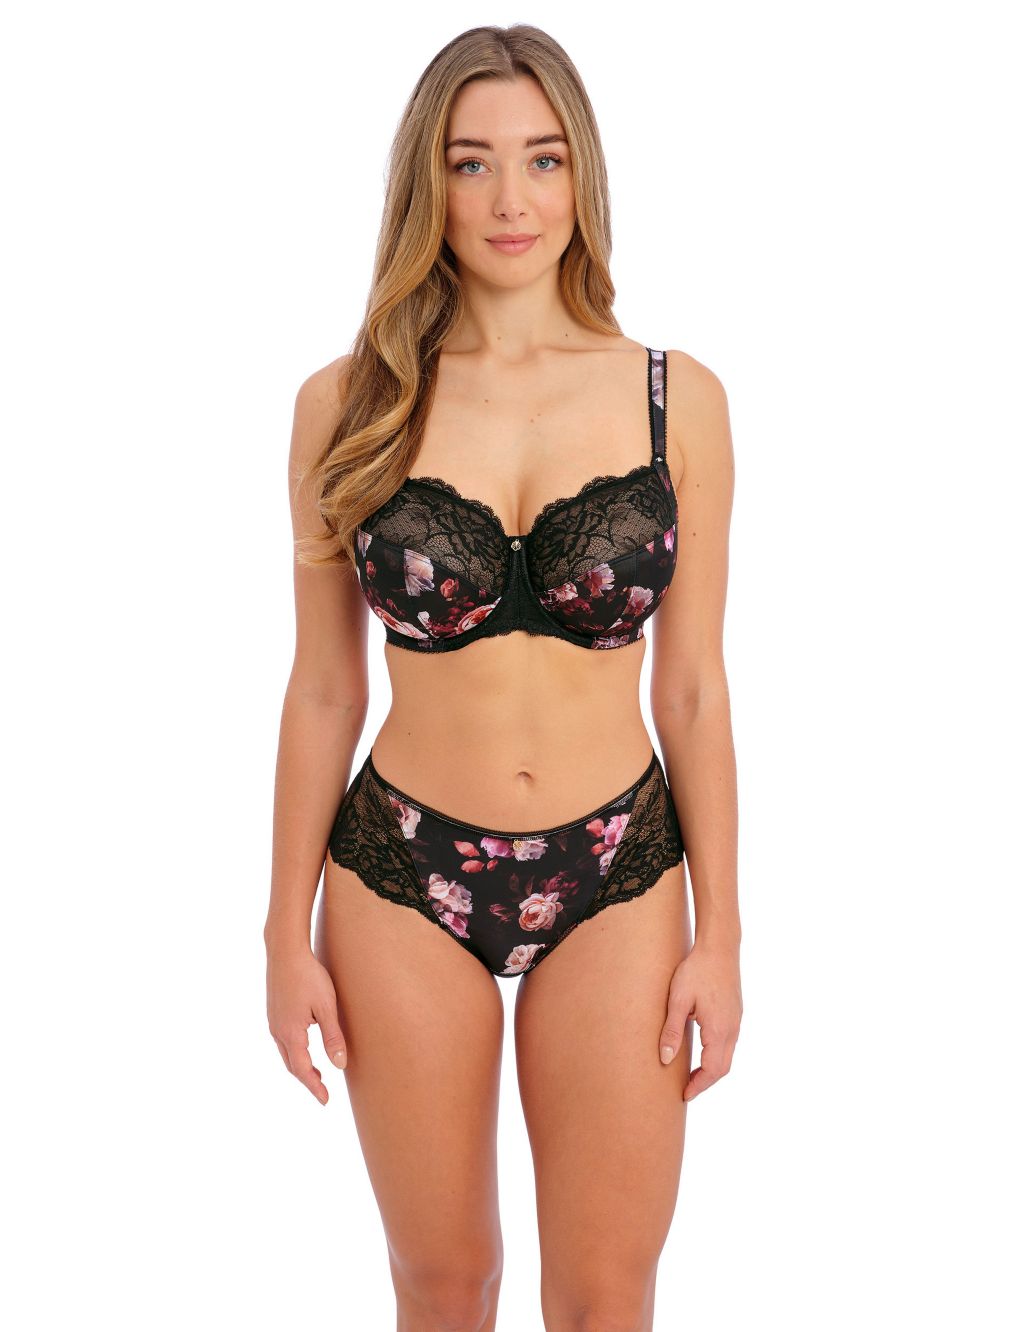 Pippa Floral Wired Side Support Bra Set image 1